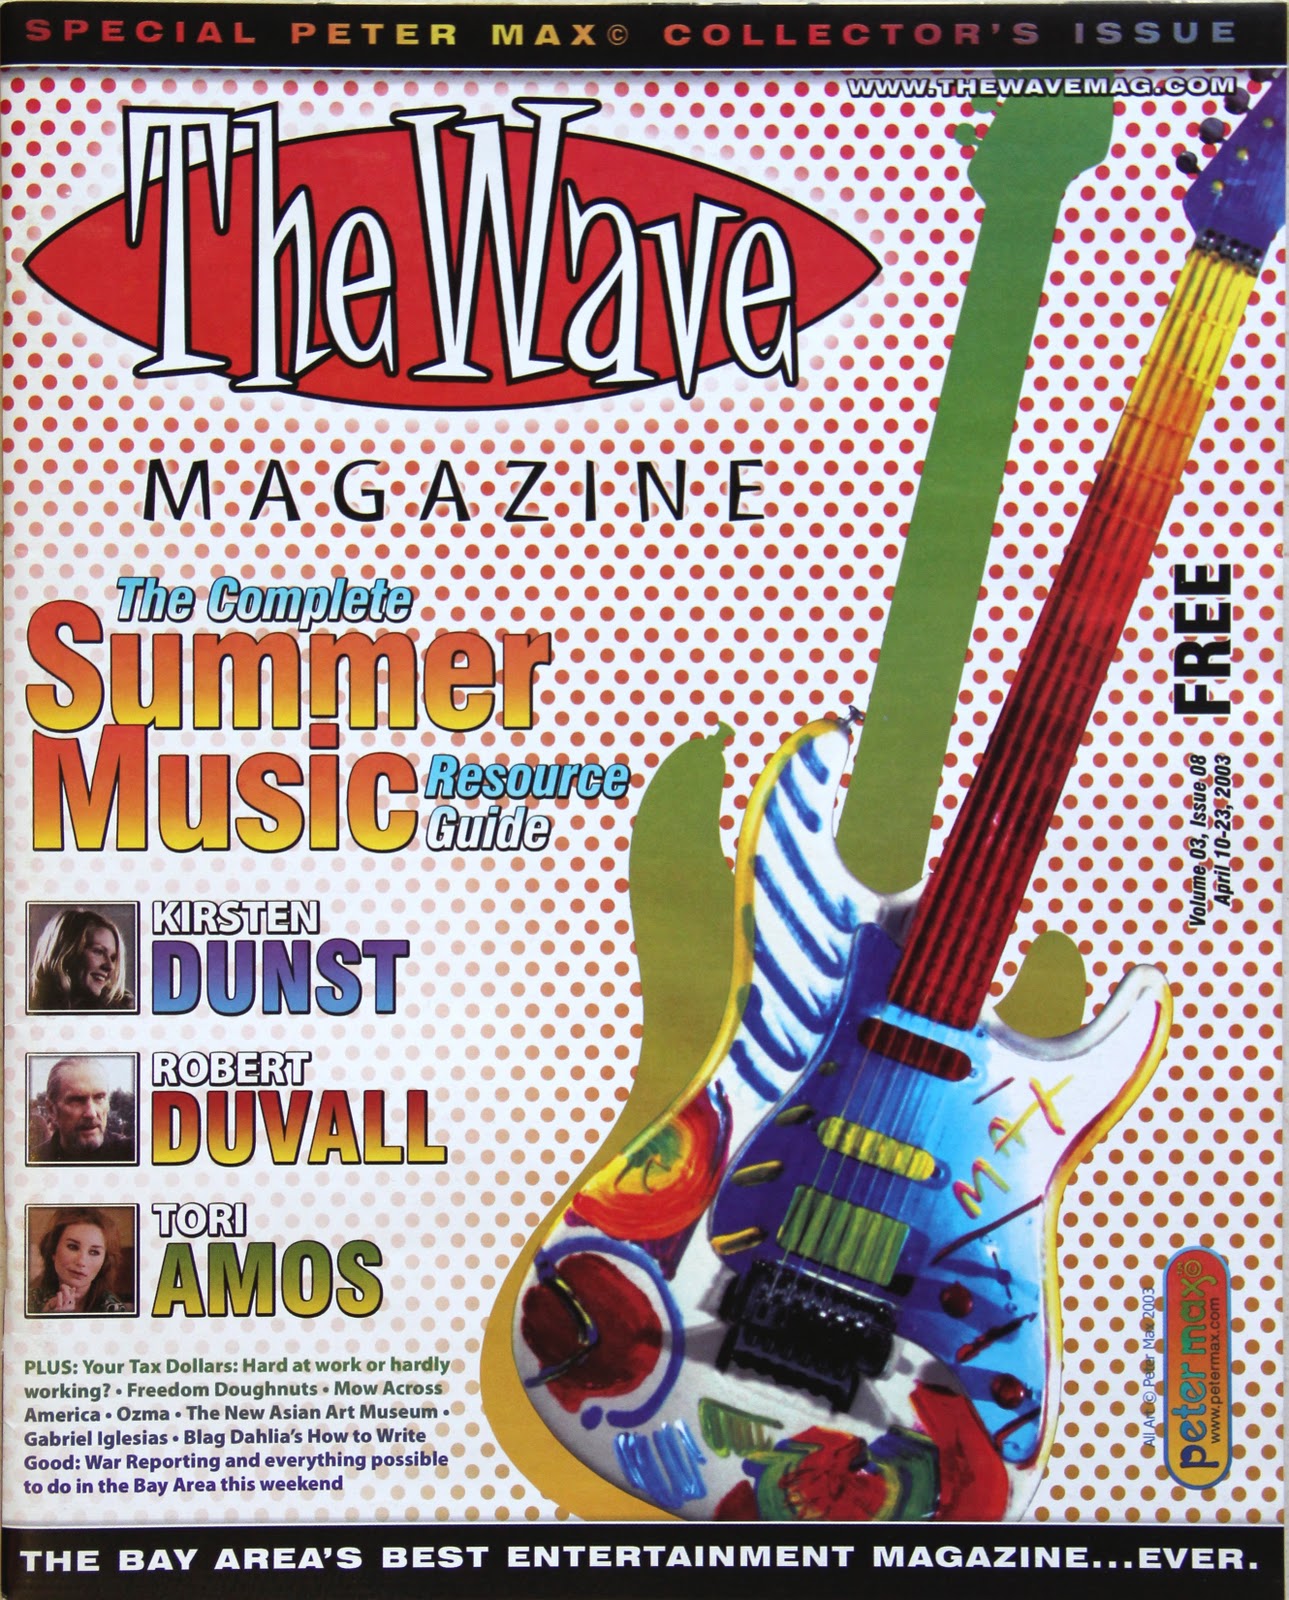 The Max Collector: THE WAVE Magazine featuring PETER MAX'S COVERS